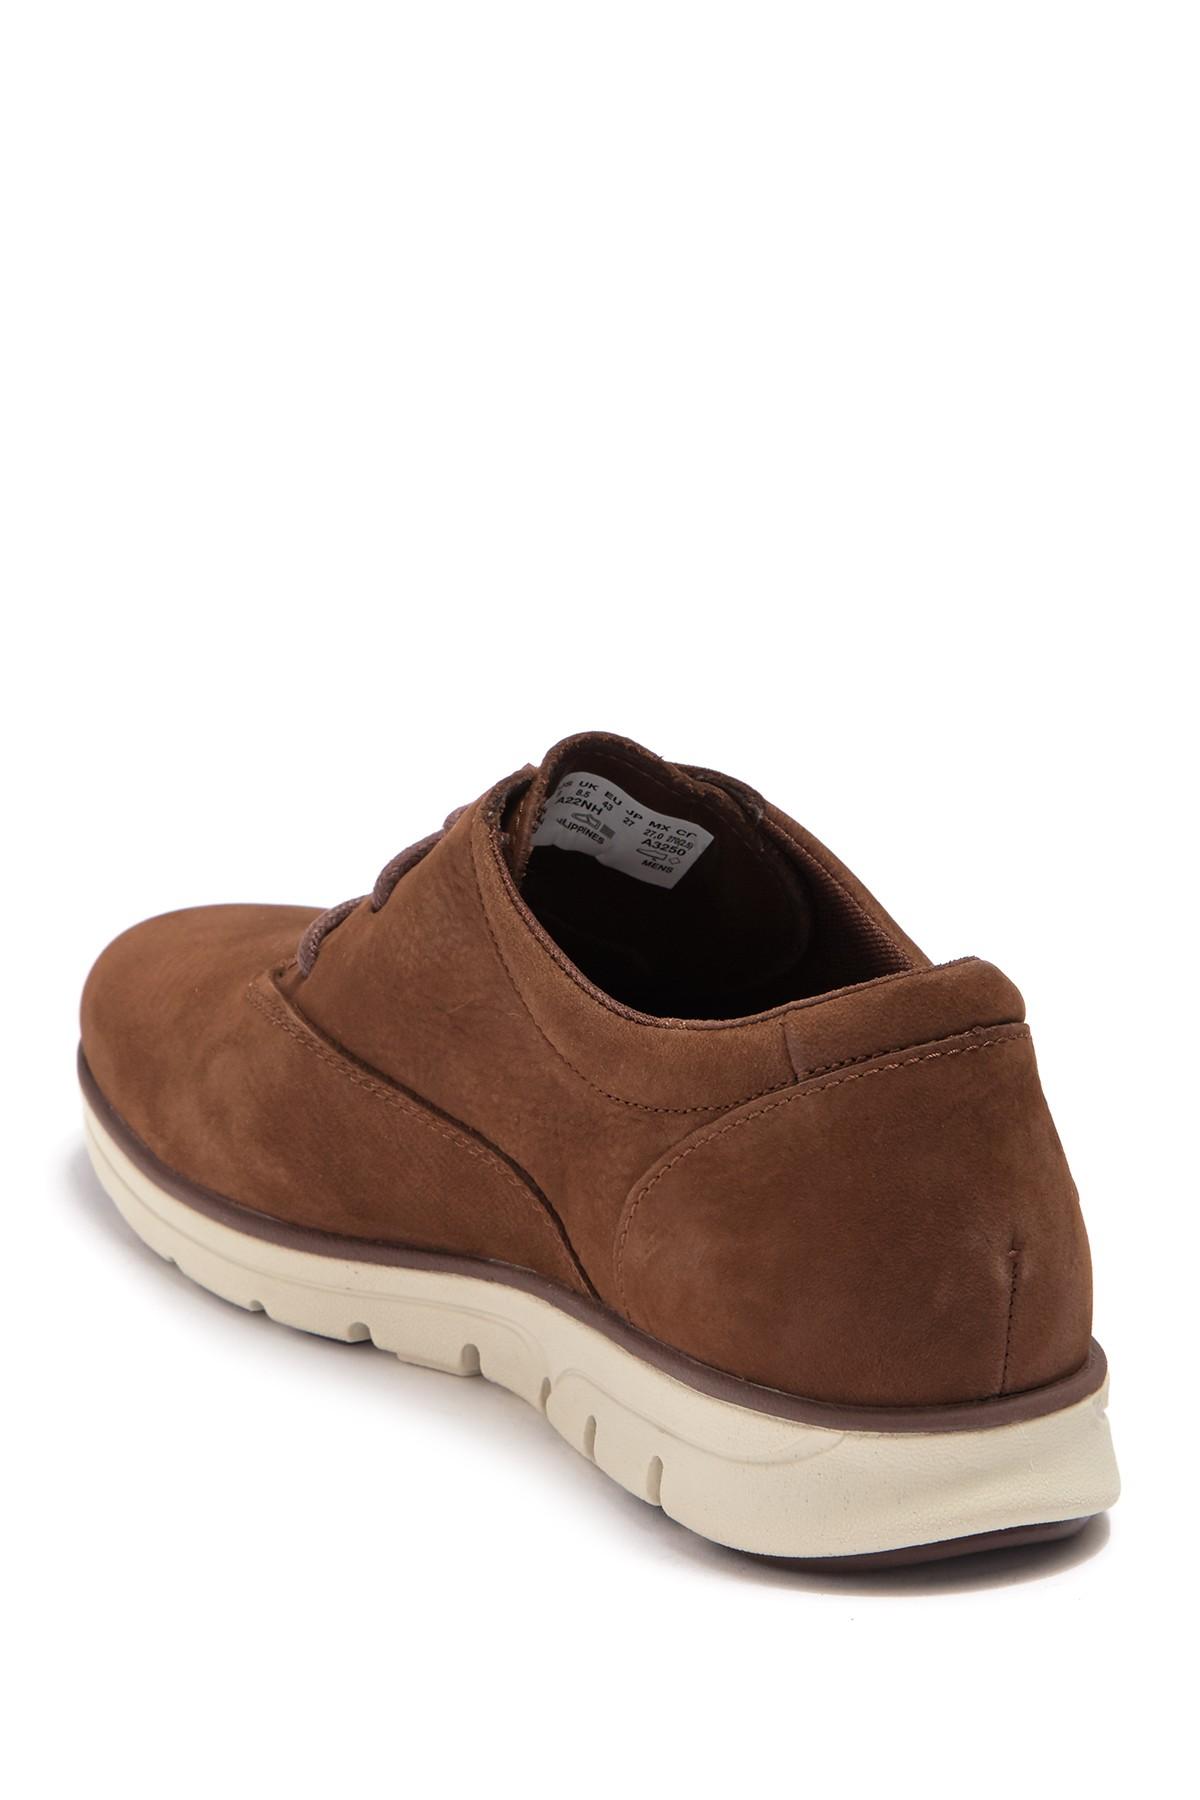 Timberland Bradstreet Oxford Lace-up Shoes Rust Suede in Brown for Men Mens Shoes Lace-ups Oxford shoes 